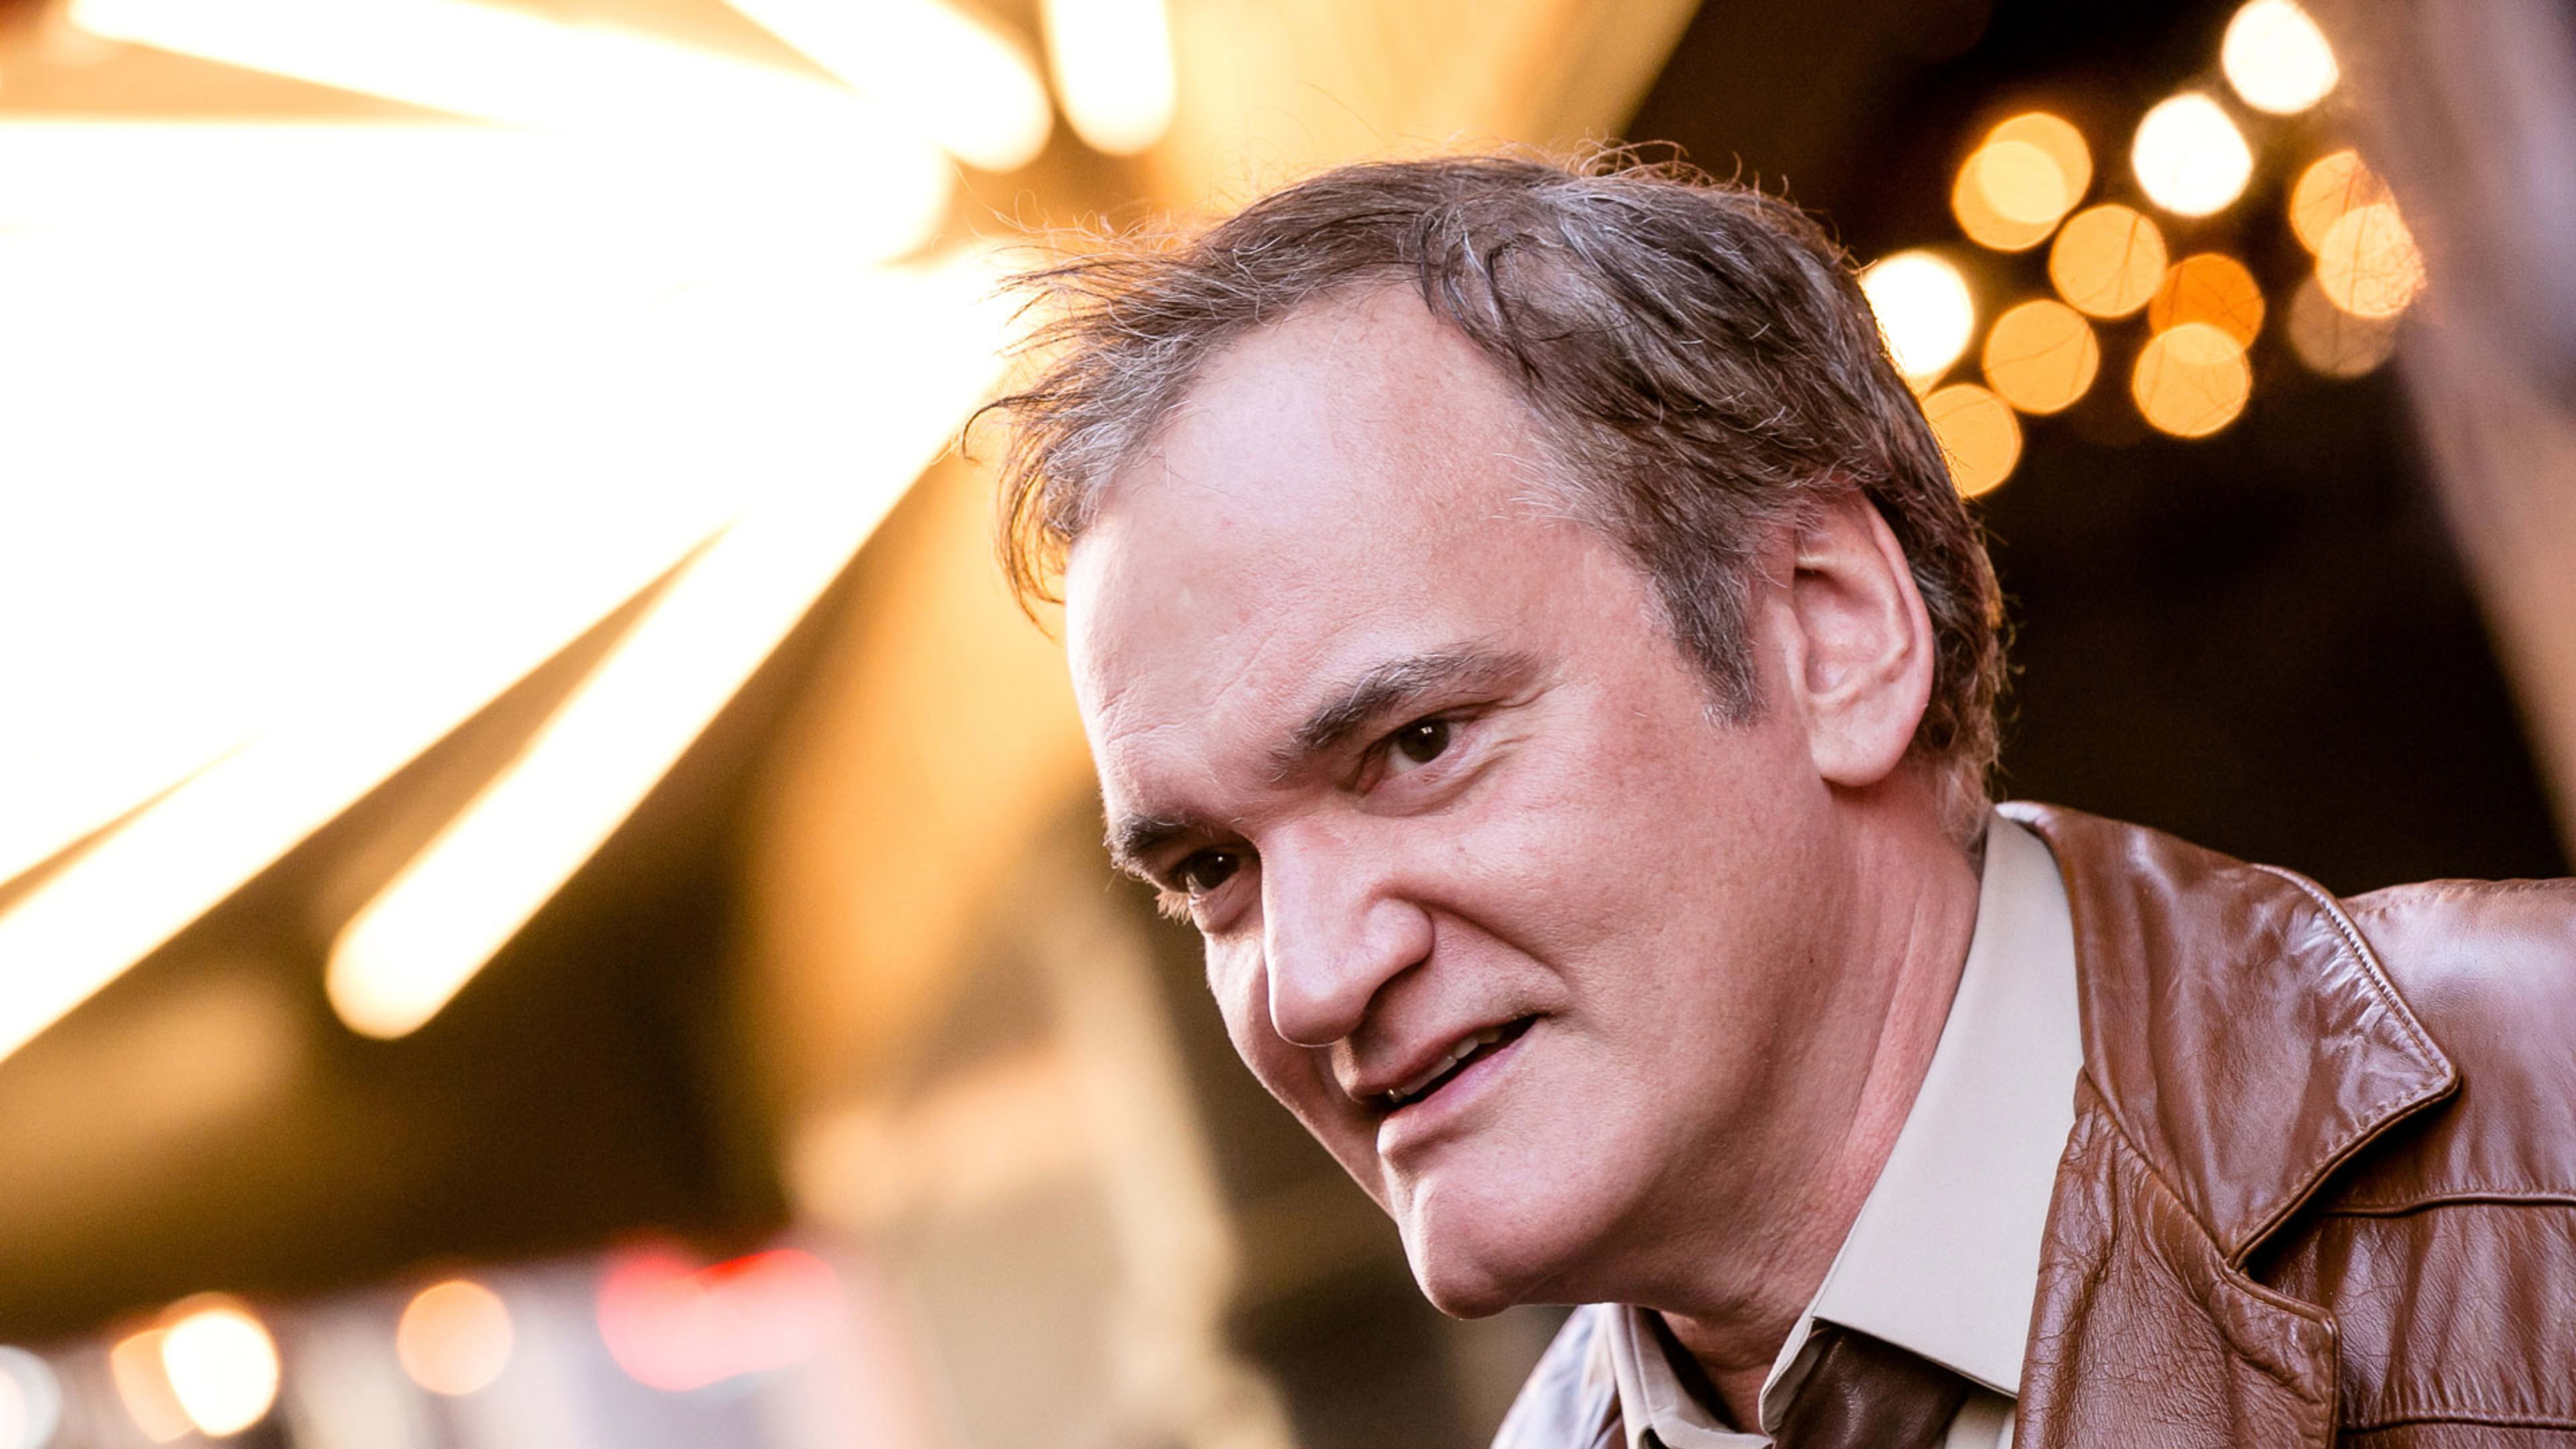 Quentin Tarantino Is Not Happy He’s “Taking The Heat” For That Uma Thurman NYT Story